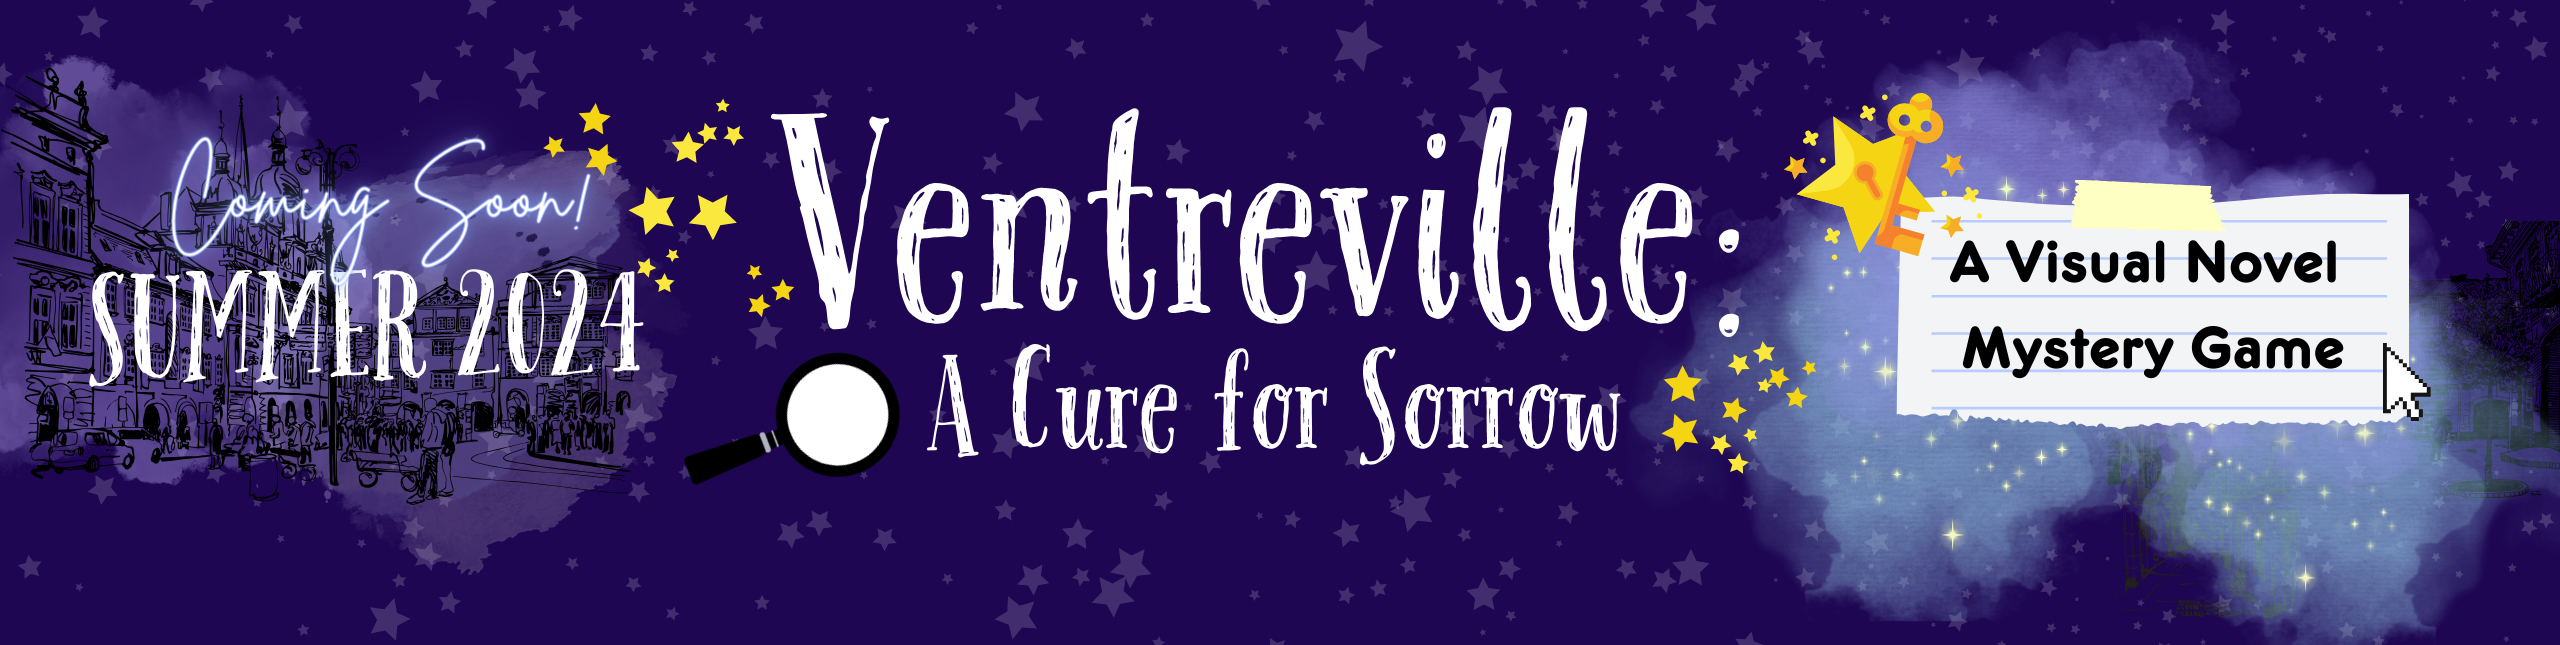 Ventreville: A Cure For Sorrow